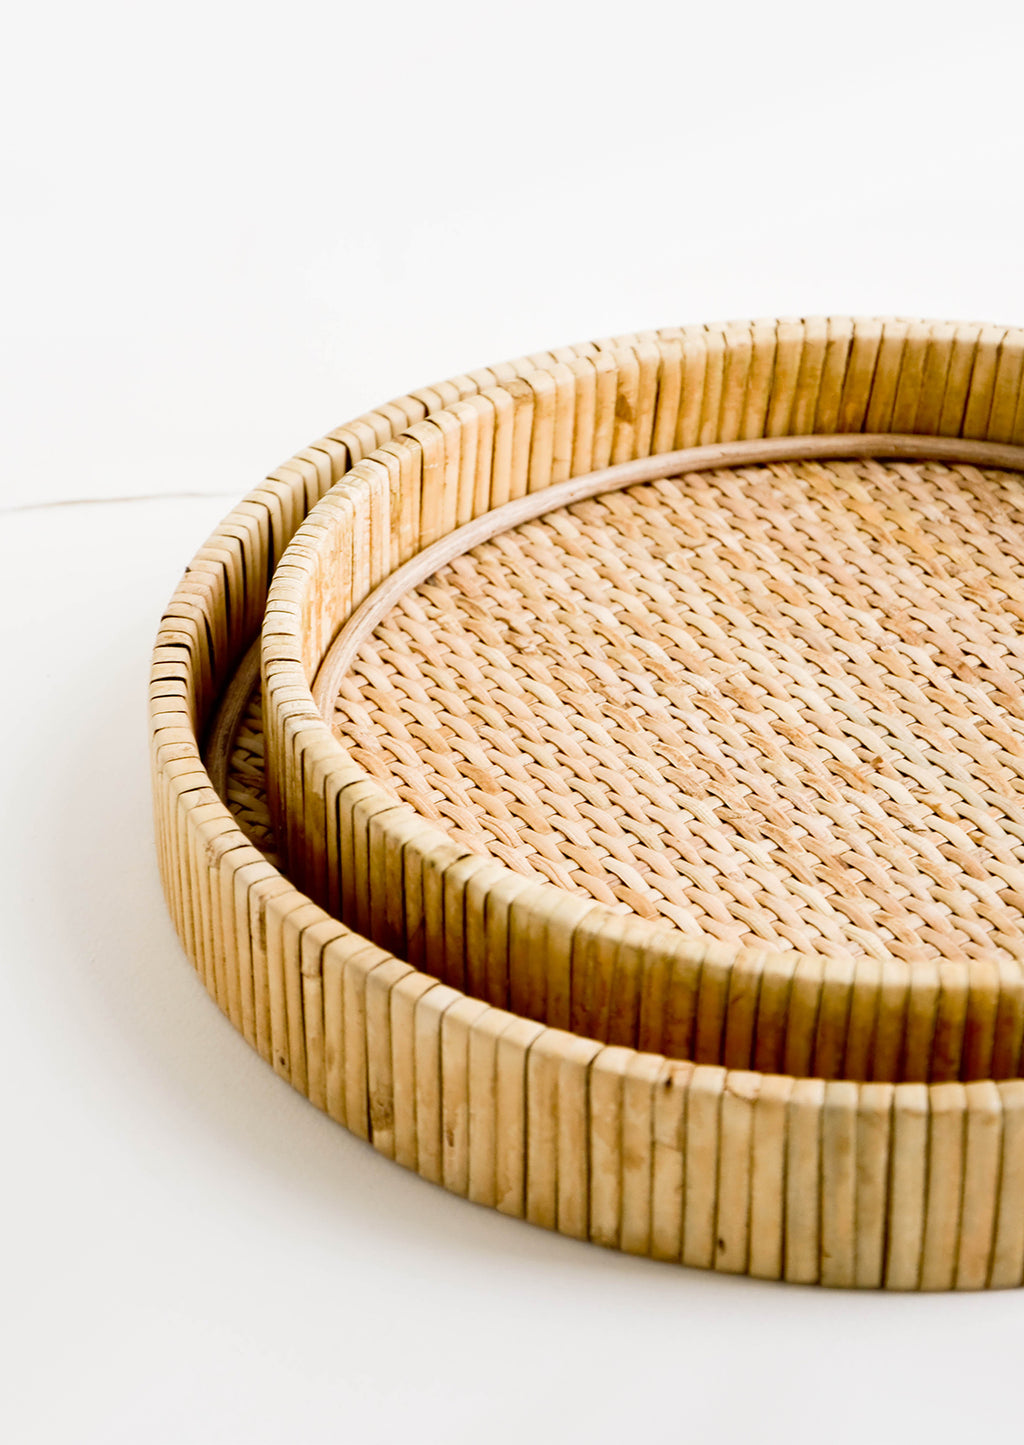 3: Nesting circular serving trays made from woven rattan